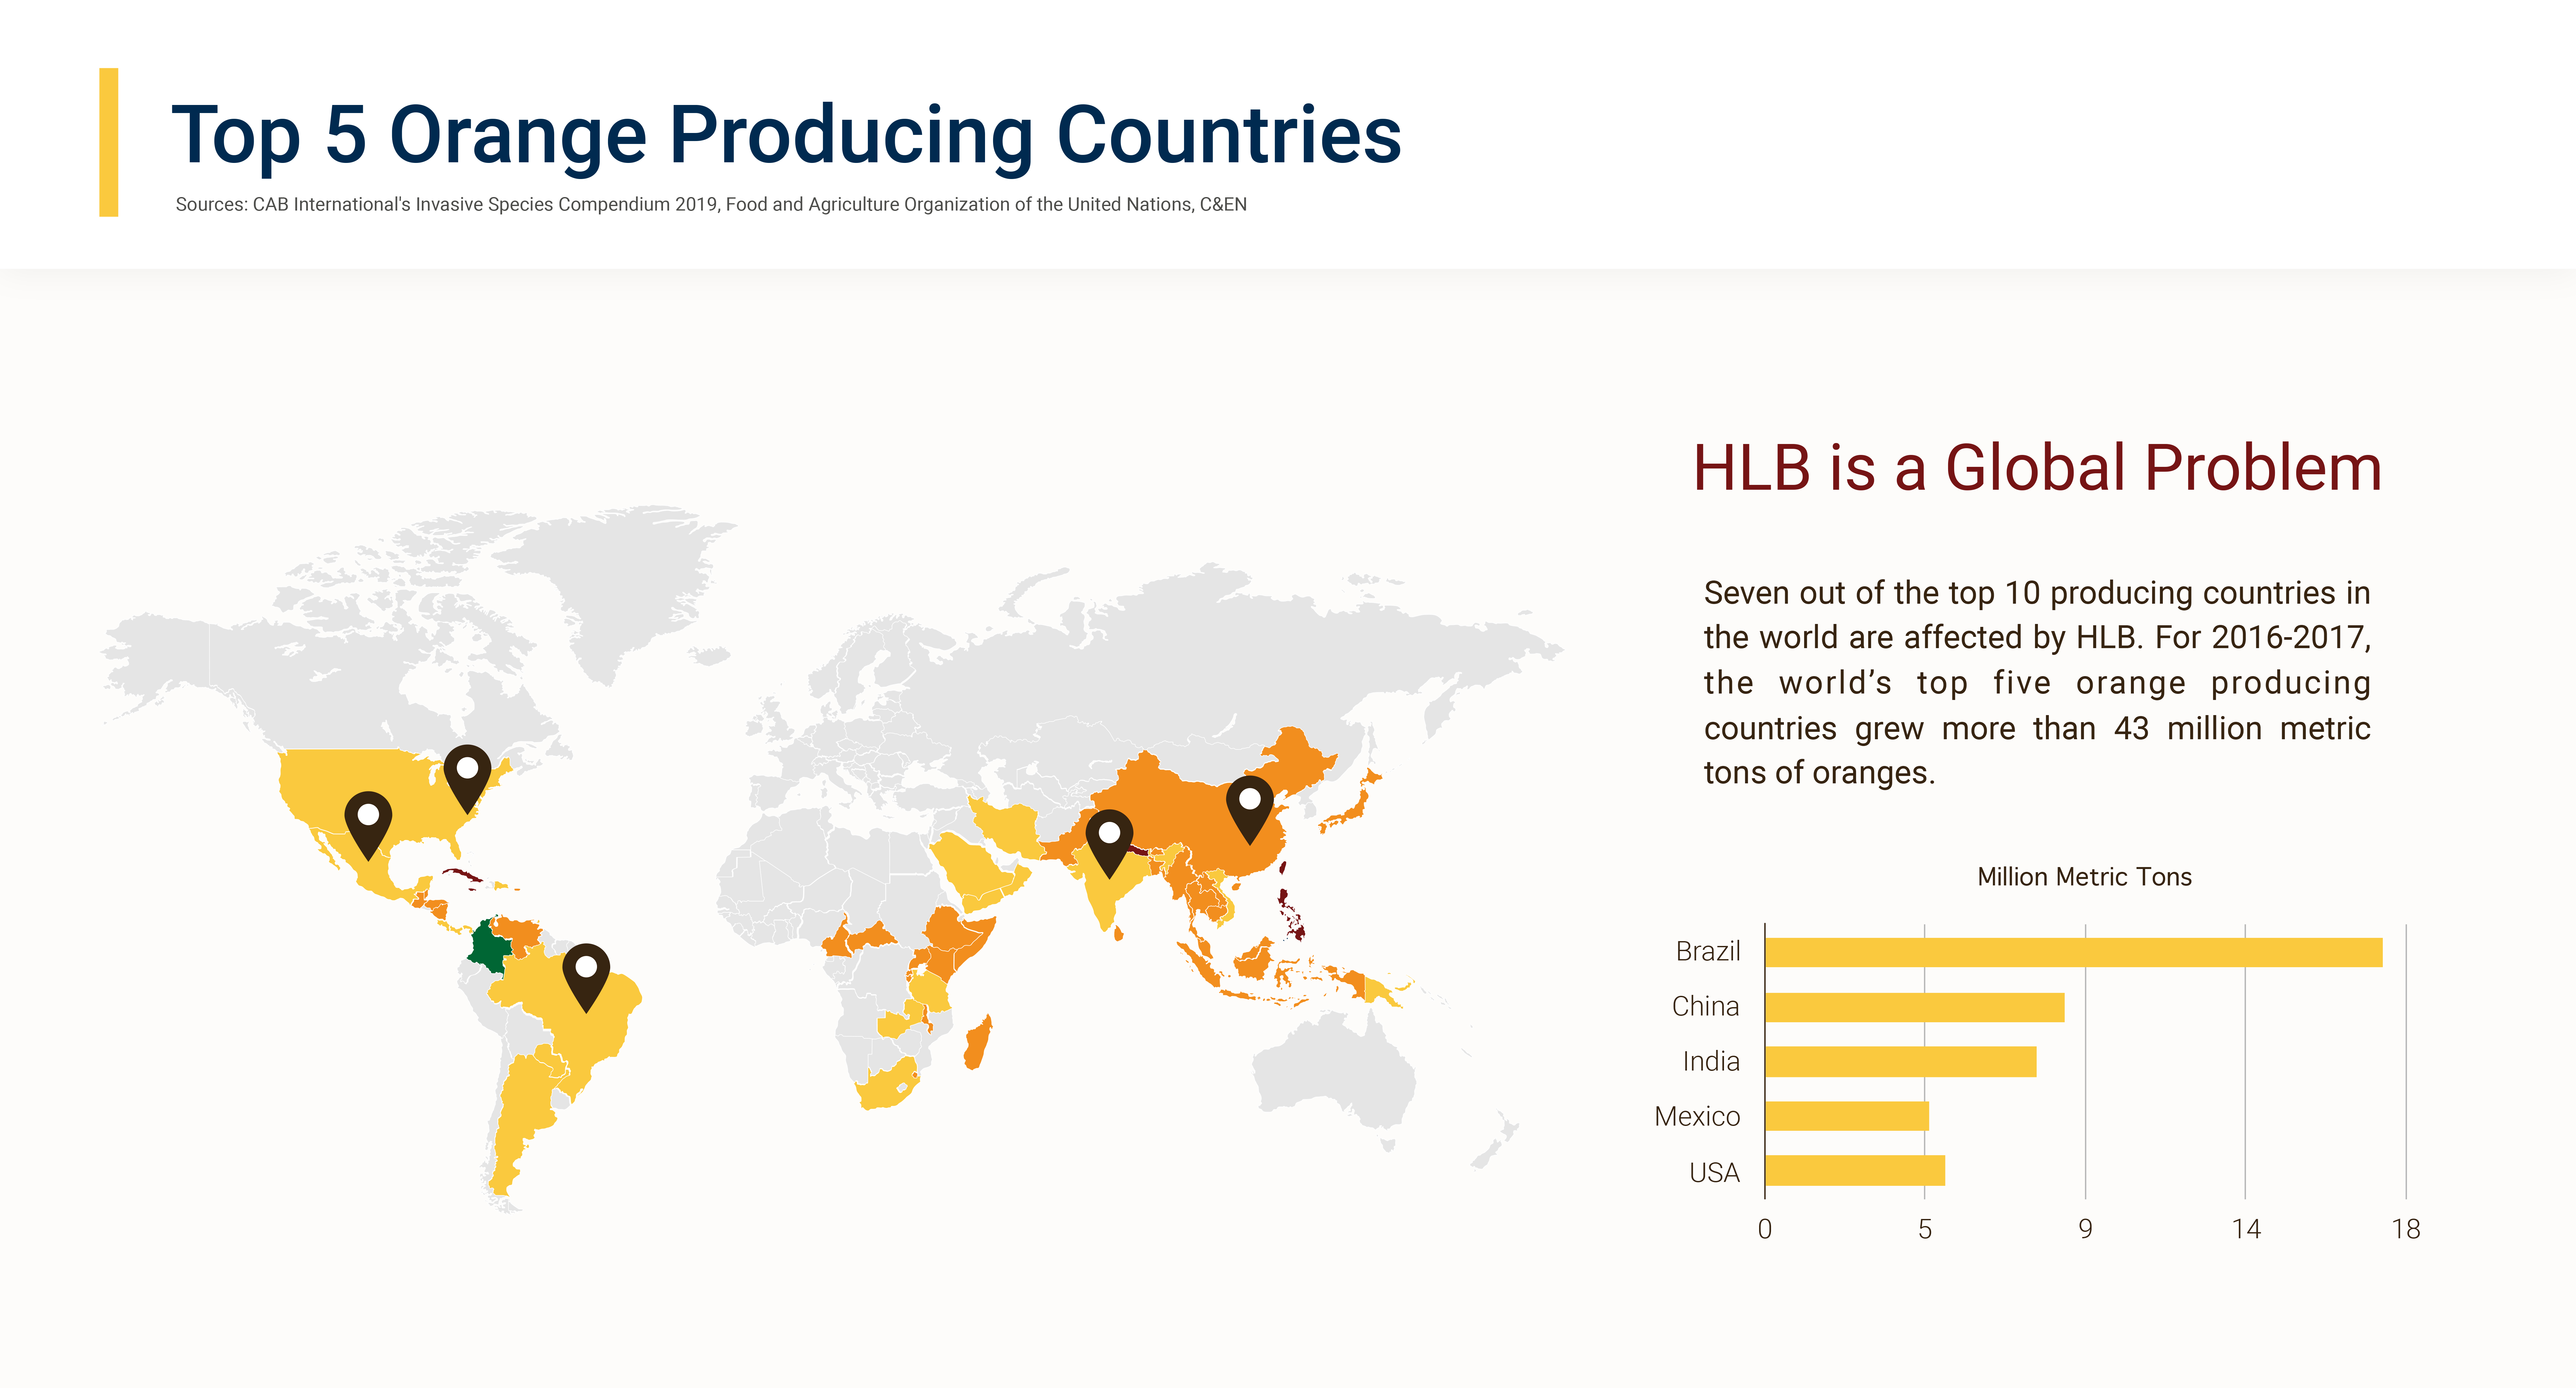 Top 5 Orange Producing Countries in the World